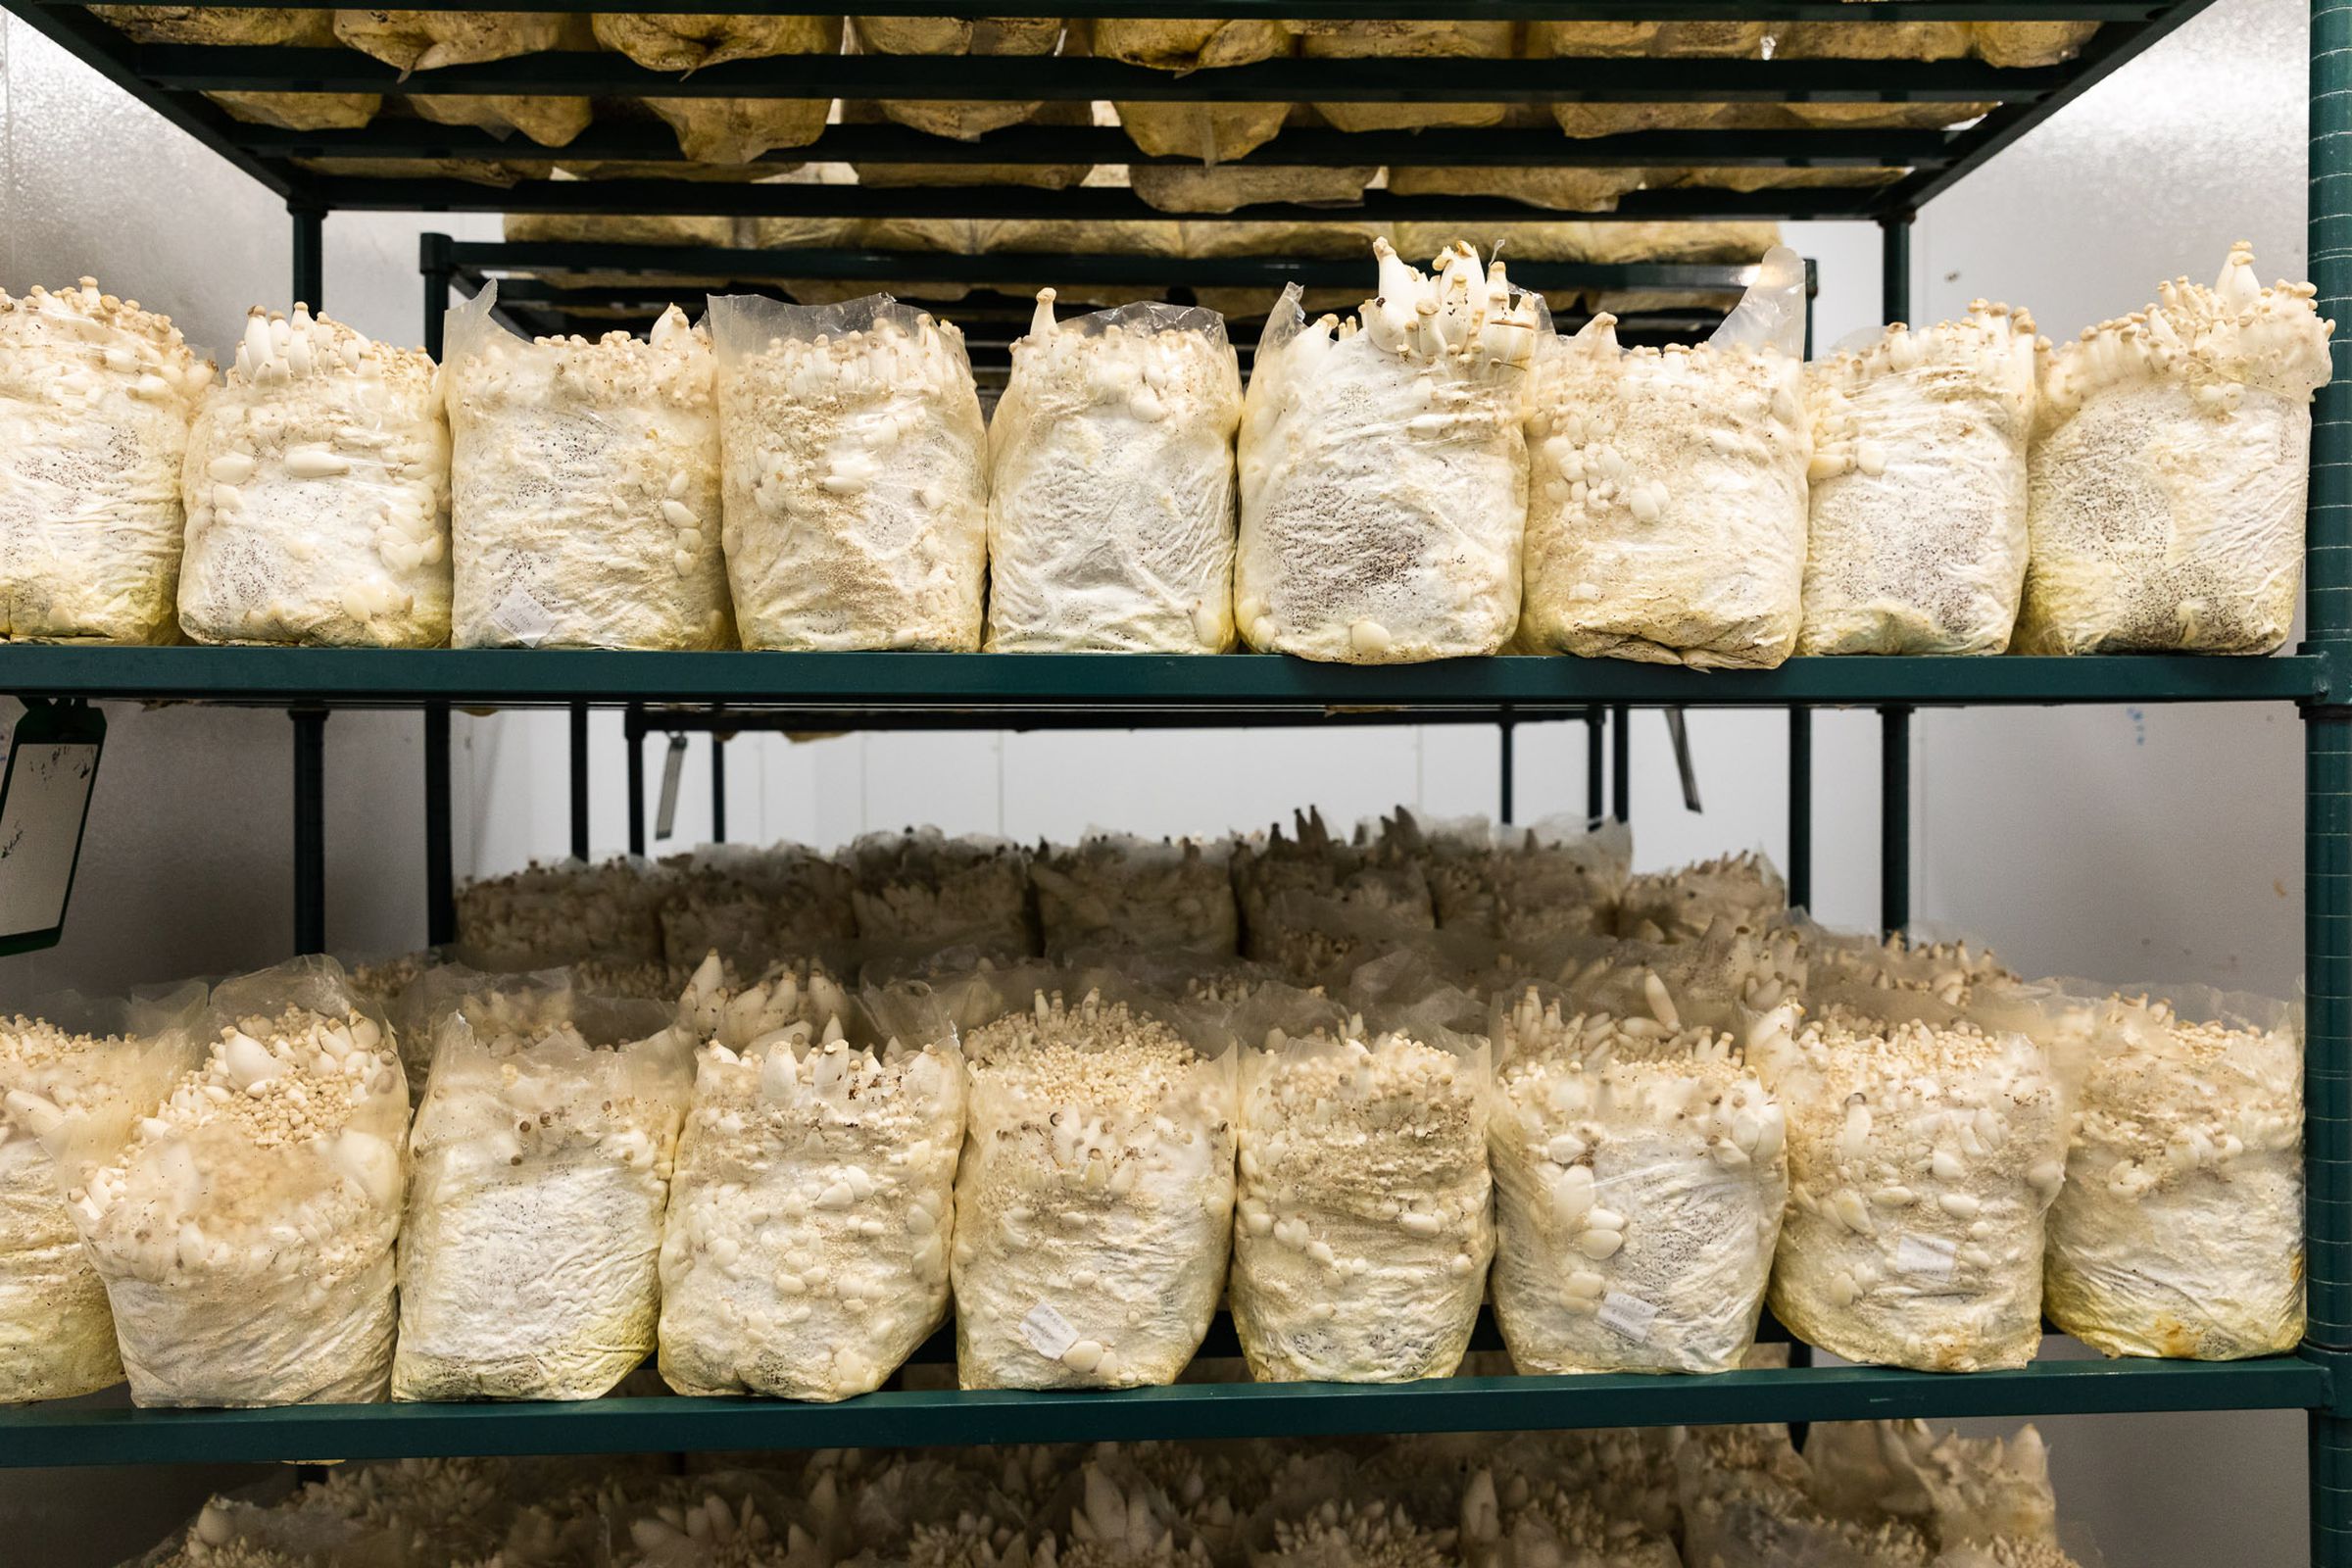 Rows of shelving units hold dozens of blocks that trumpet mushrooms grow from.